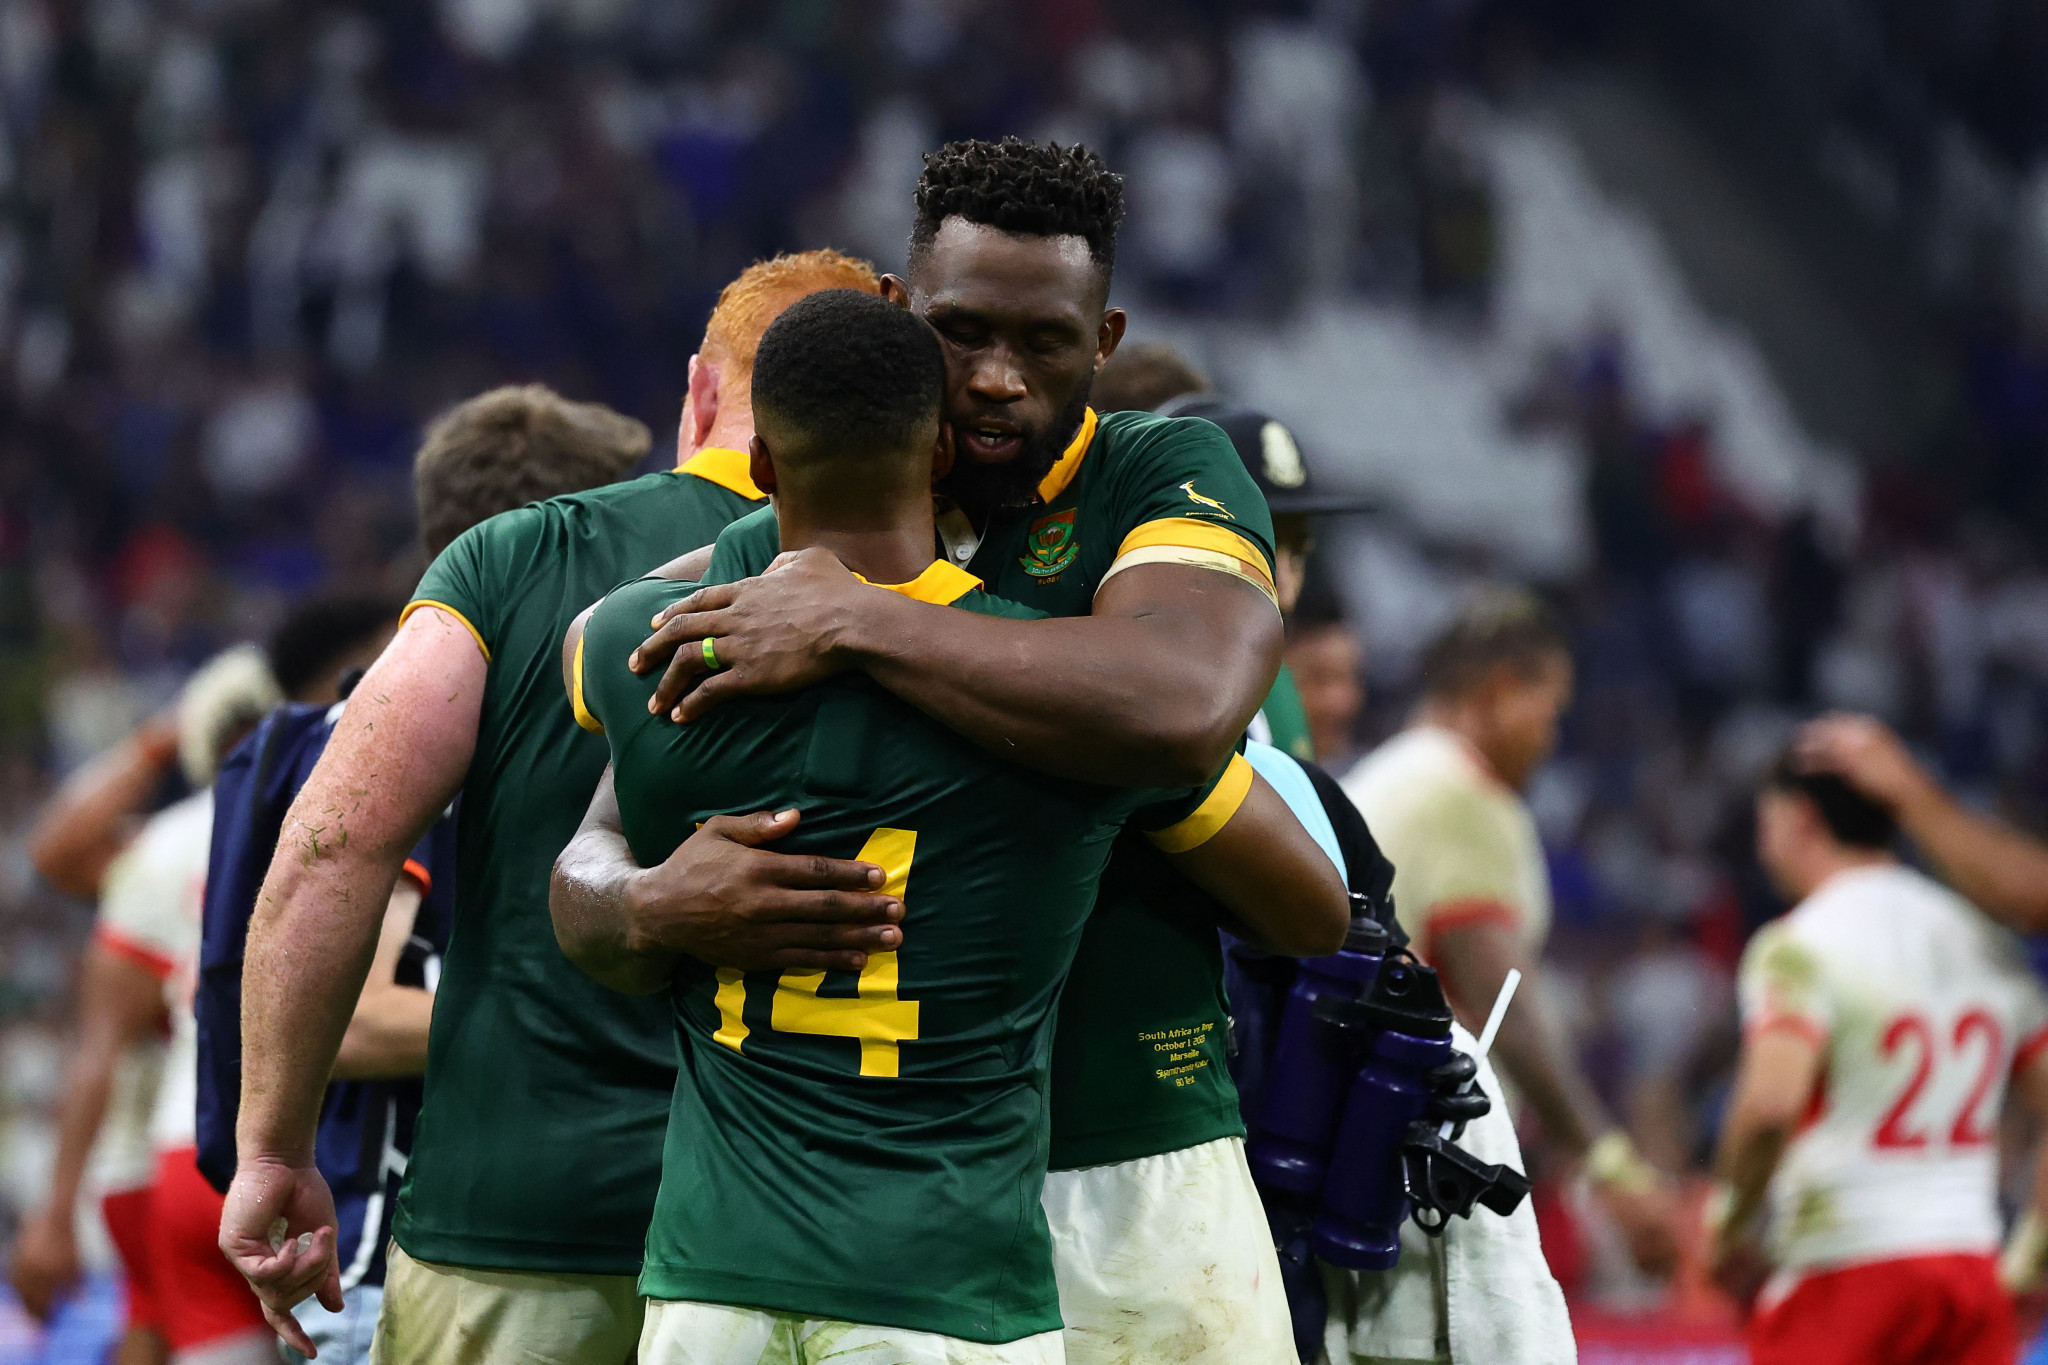 Only an unlikely result in the final match between Ireland and Scotland would deny holders South Africa a place in the Rugby World Cup quarter-finals ©Getty Images